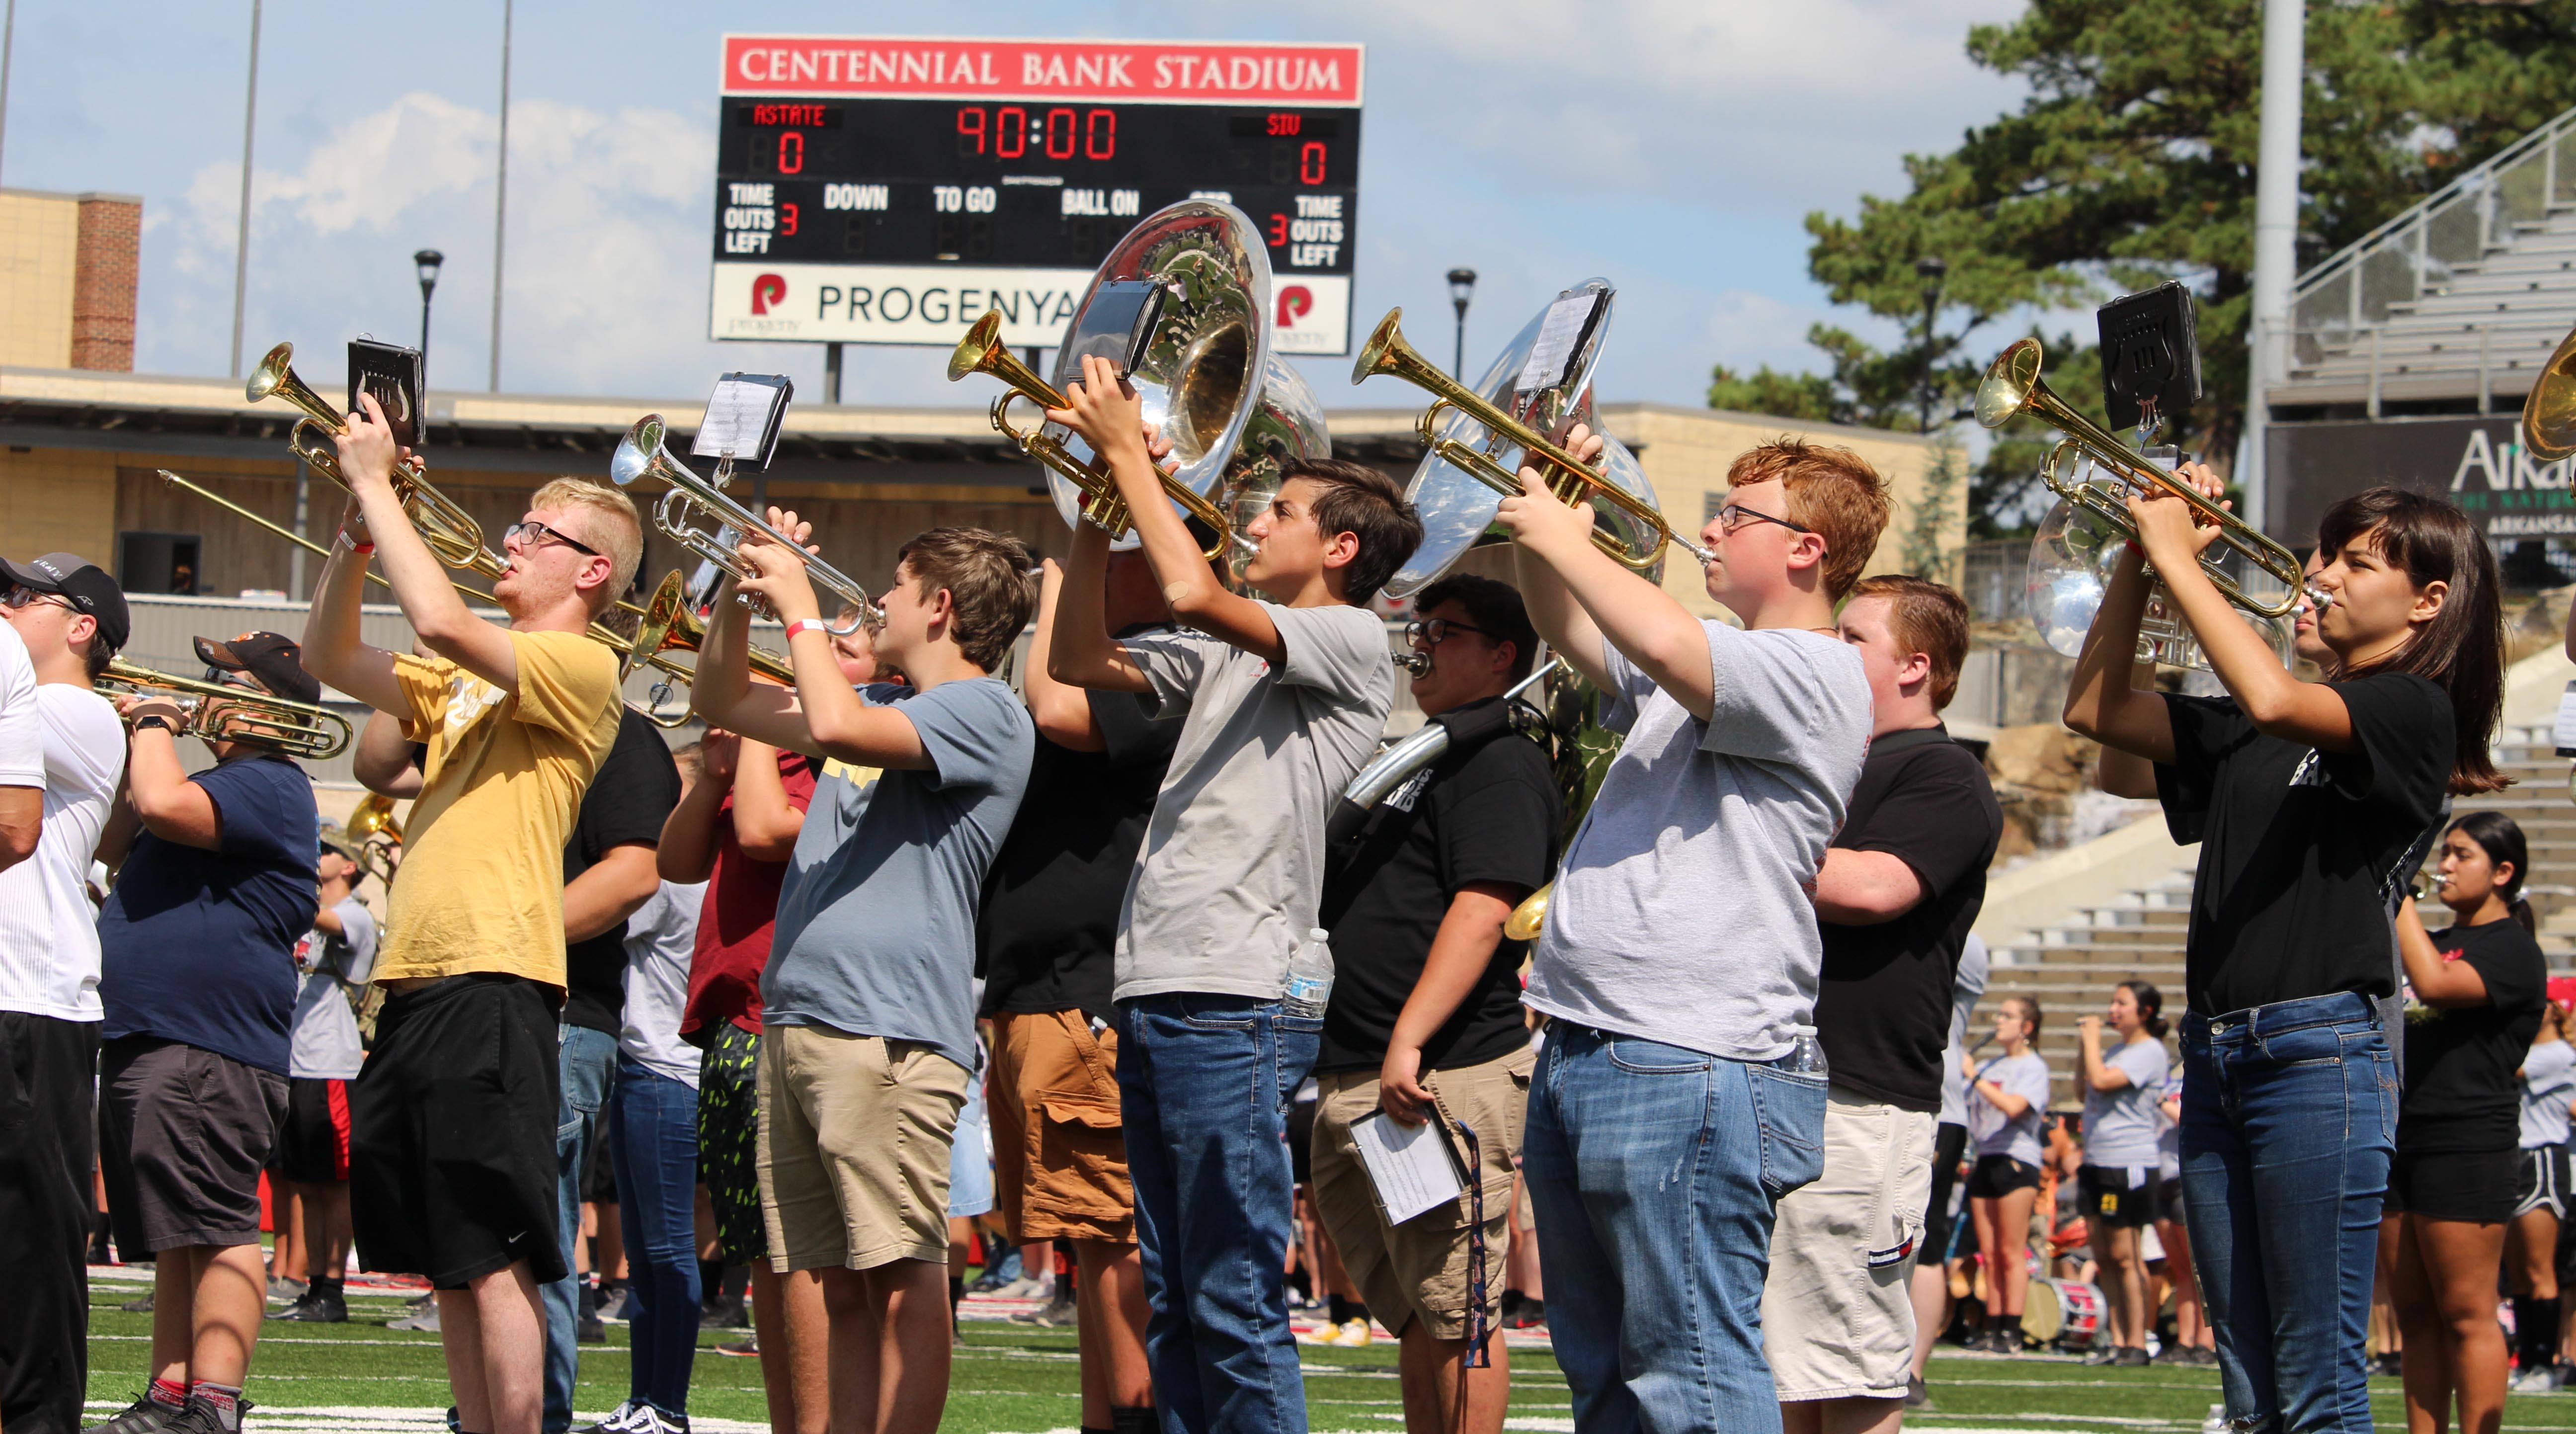 high-school-bands-perform-during-a-state-band-day-delta-digital-news